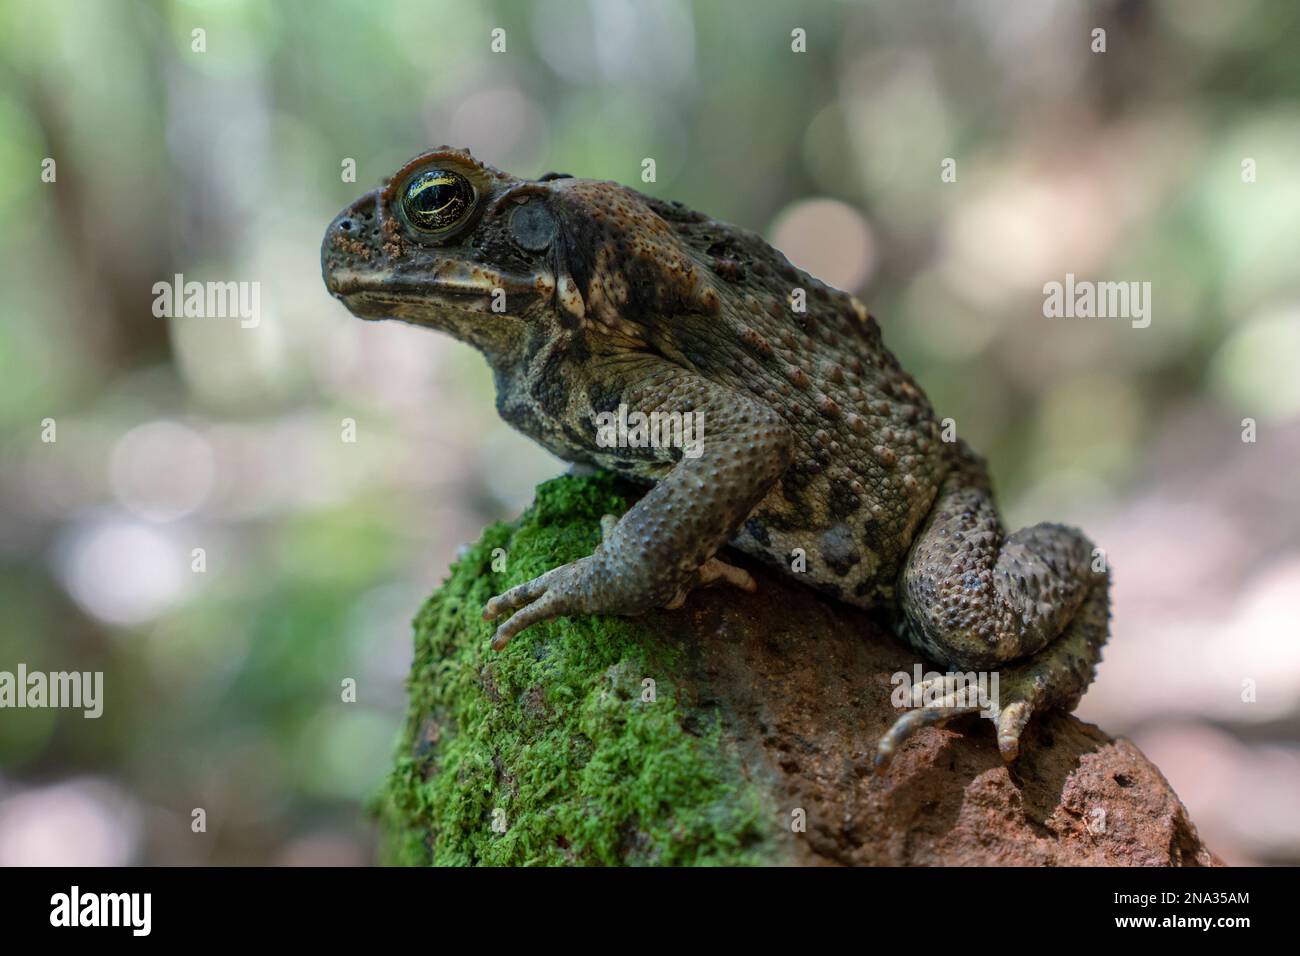 Cane toad close-up in tropical north-east Australia near Cairns Stock Photo